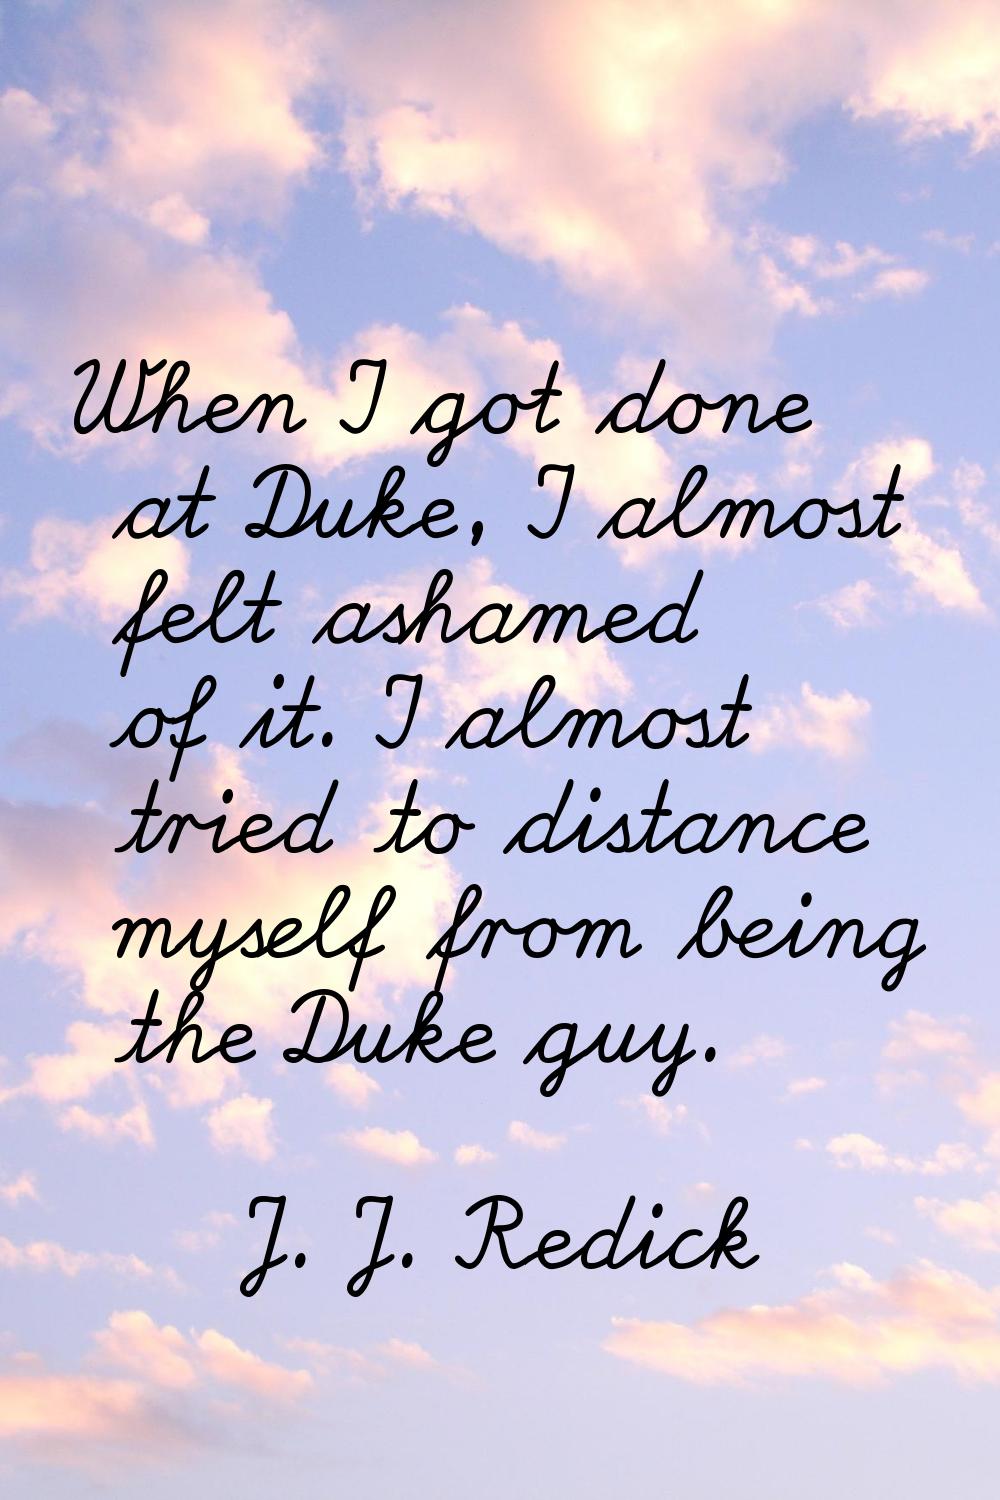 When I got done at Duke, I almost felt ashamed of it. I almost tried to distance myself from being 